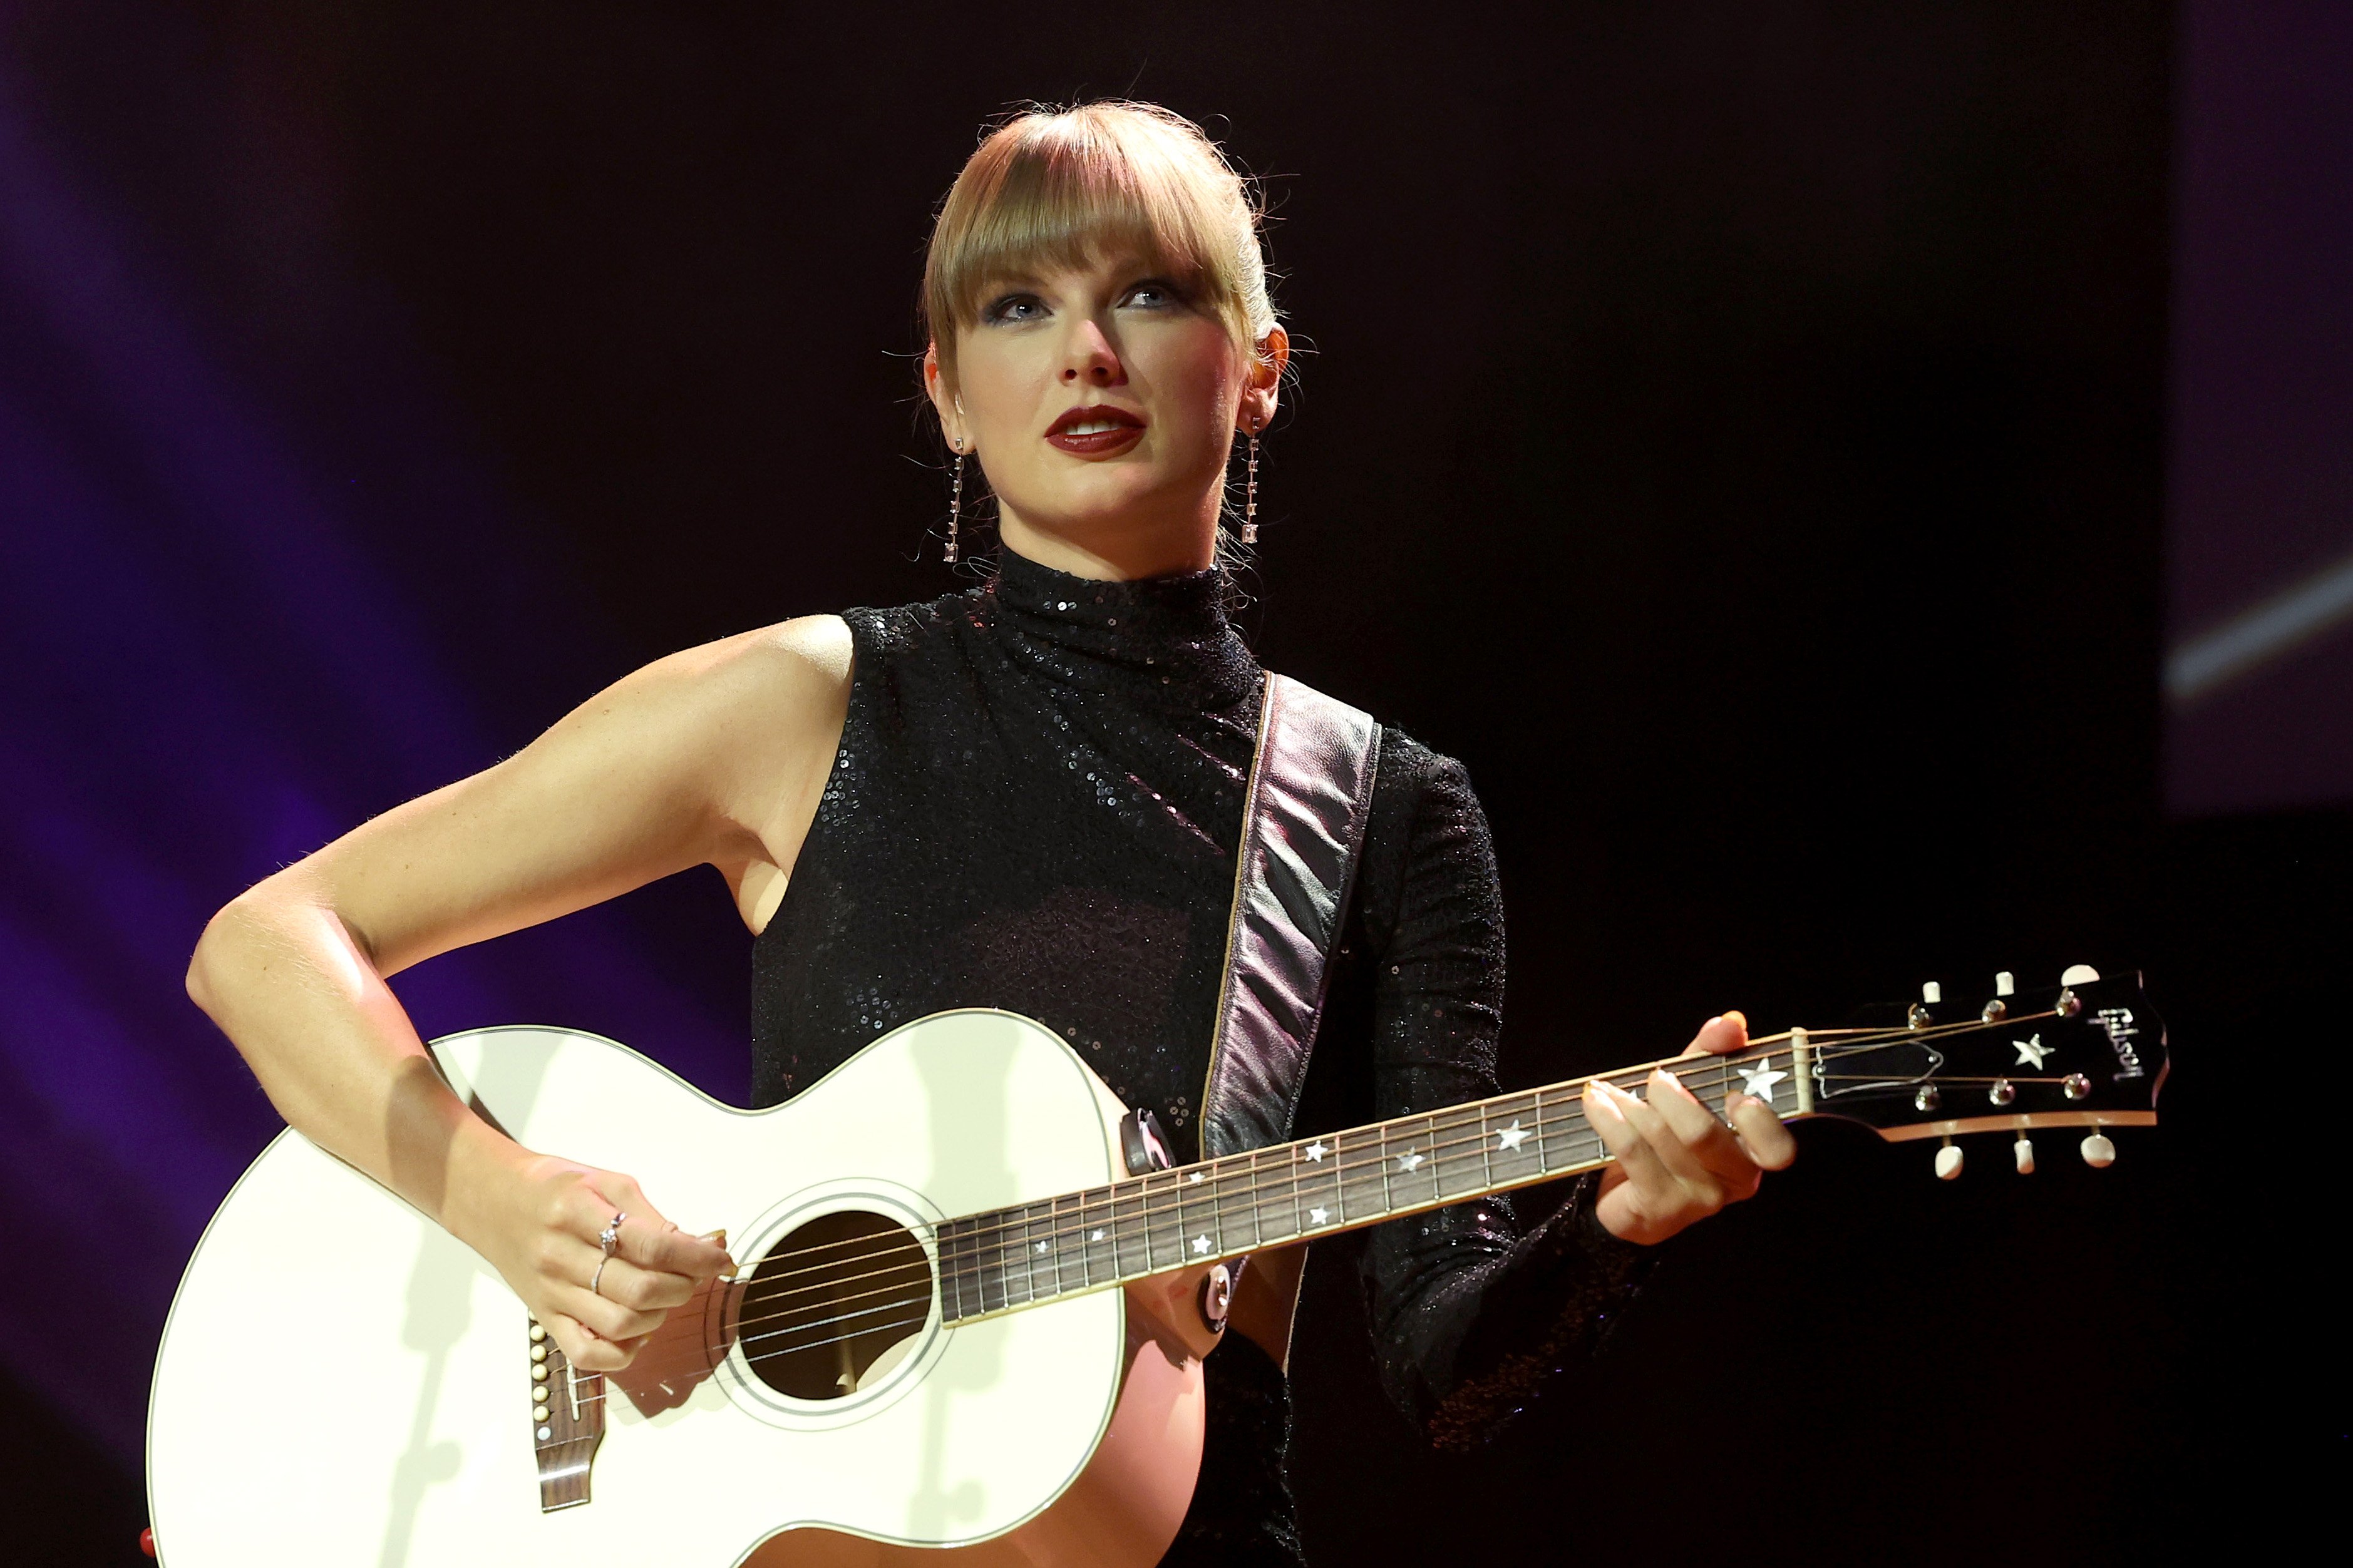 Taylor Swift wears a black shirt while playing a white acoustic guitar